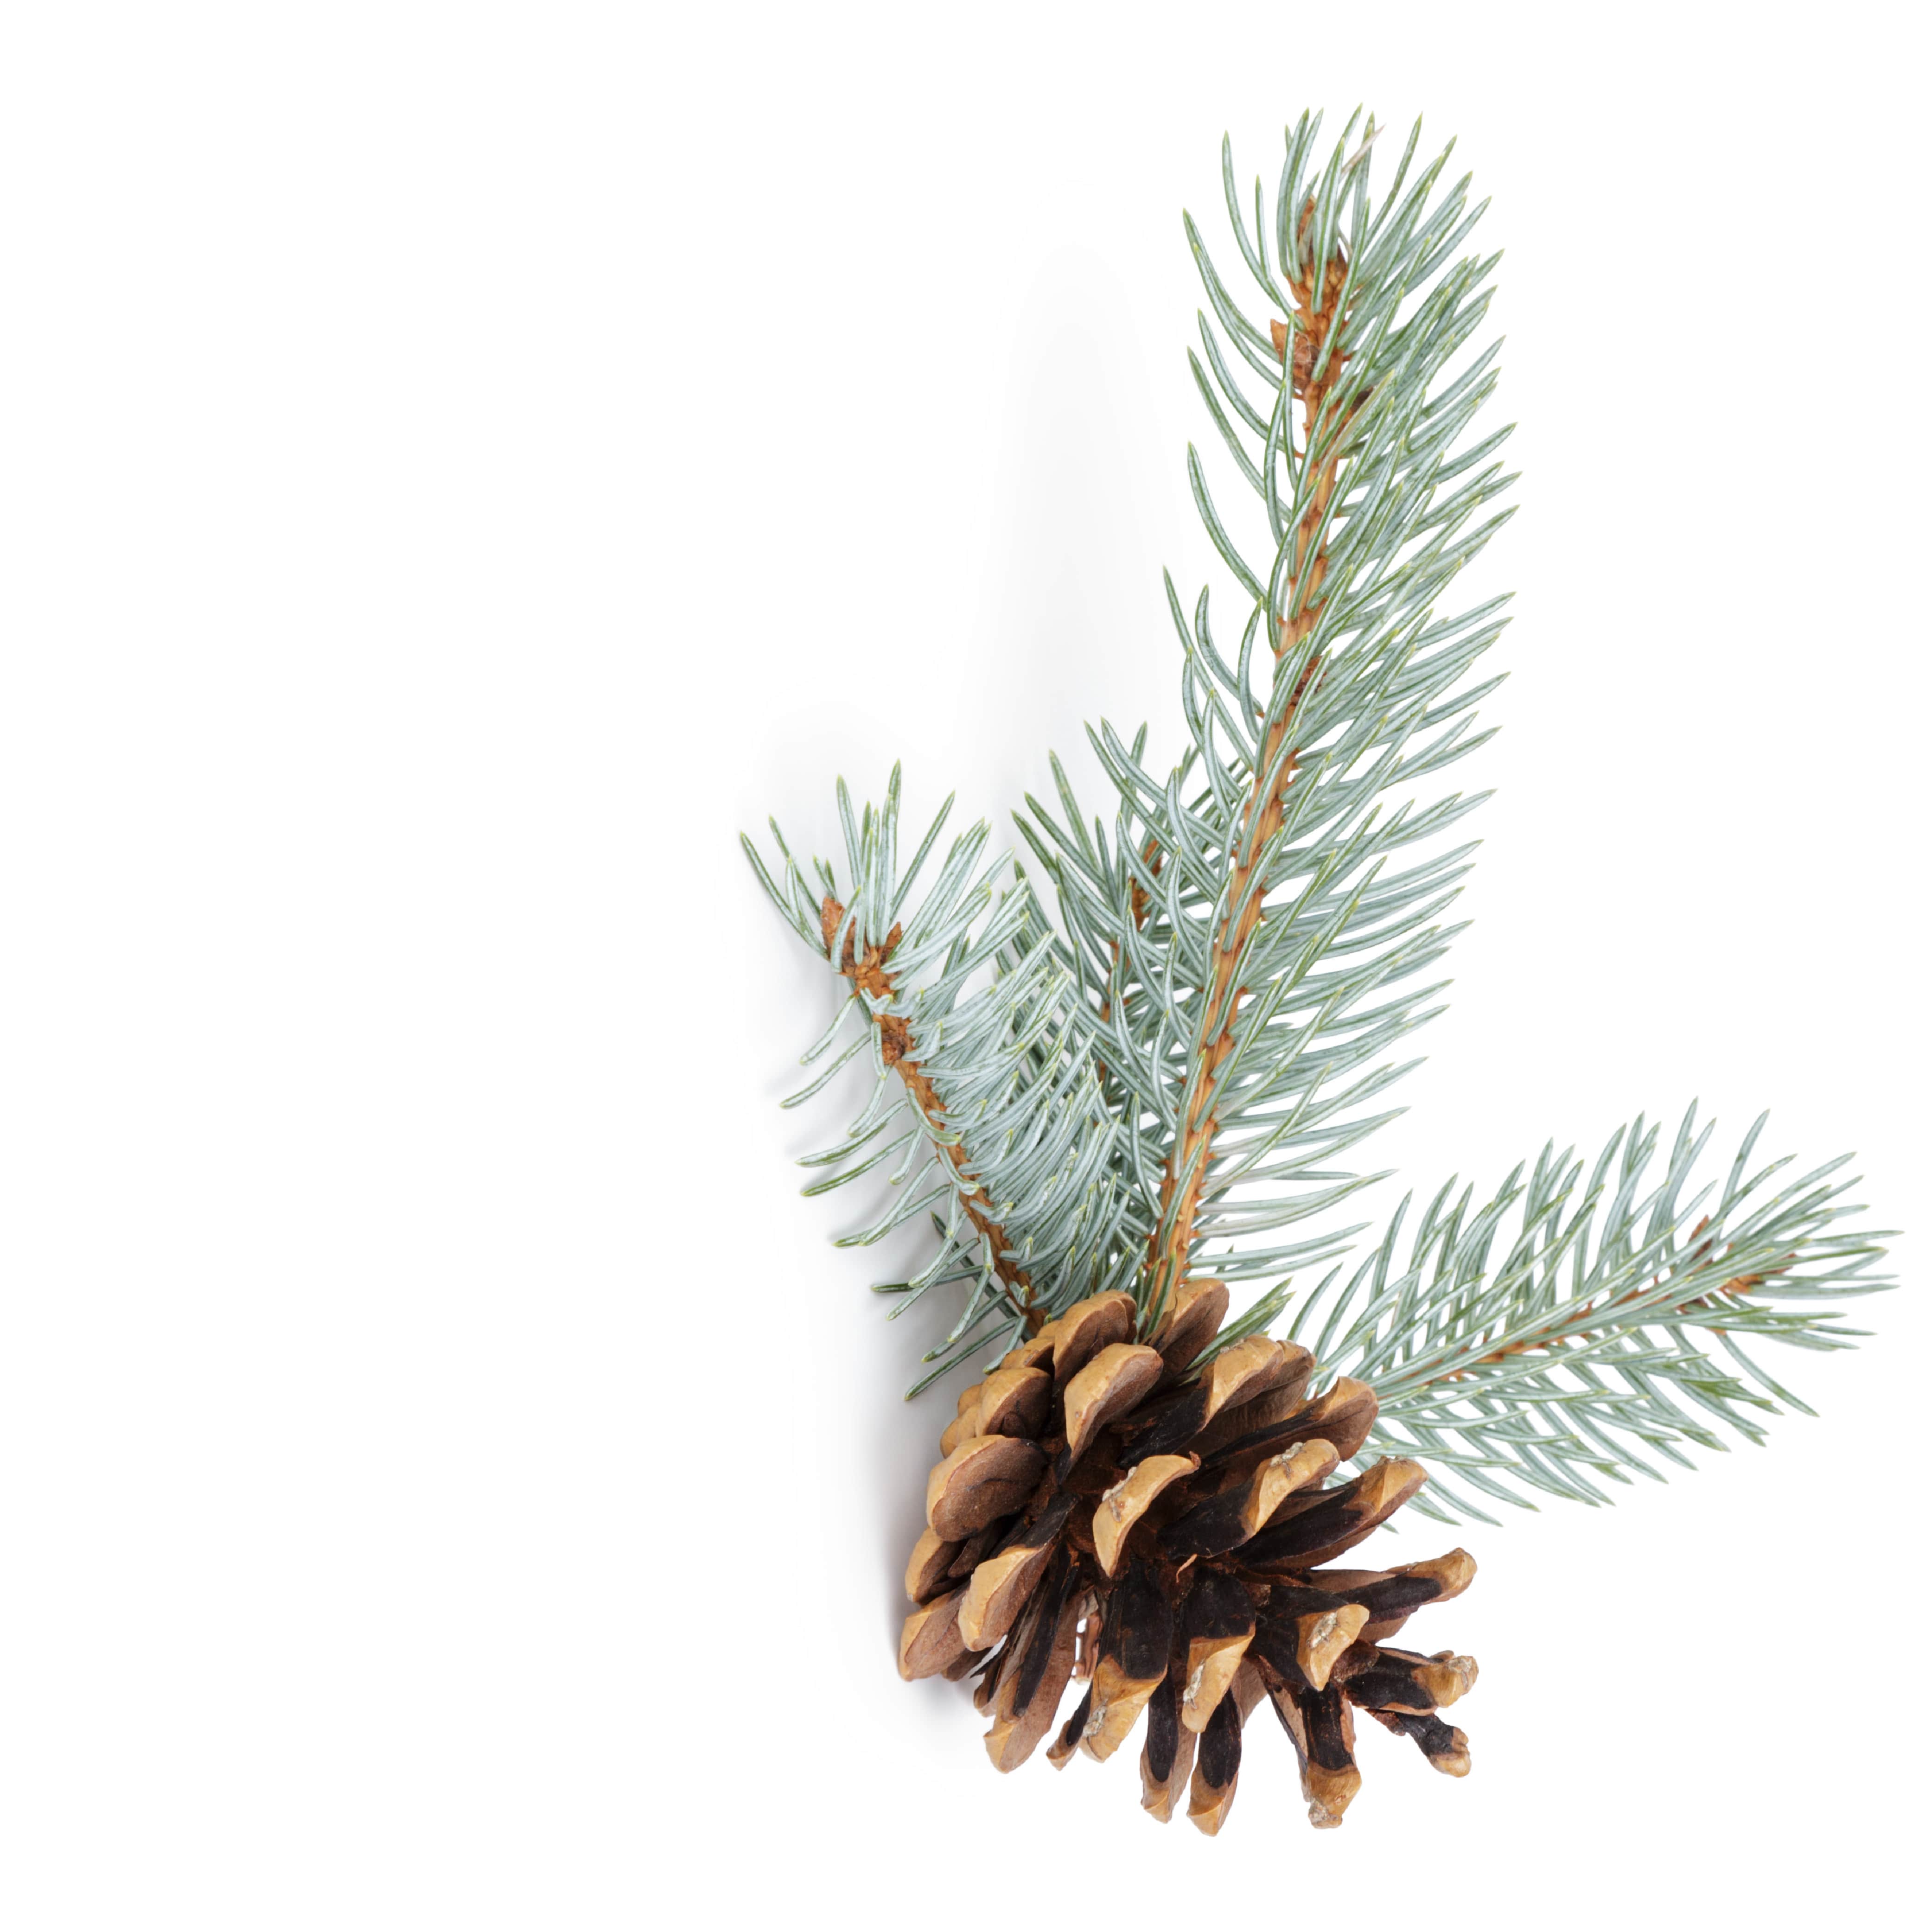 Blue Spruce Fragrance Oil for Soaps & Candles